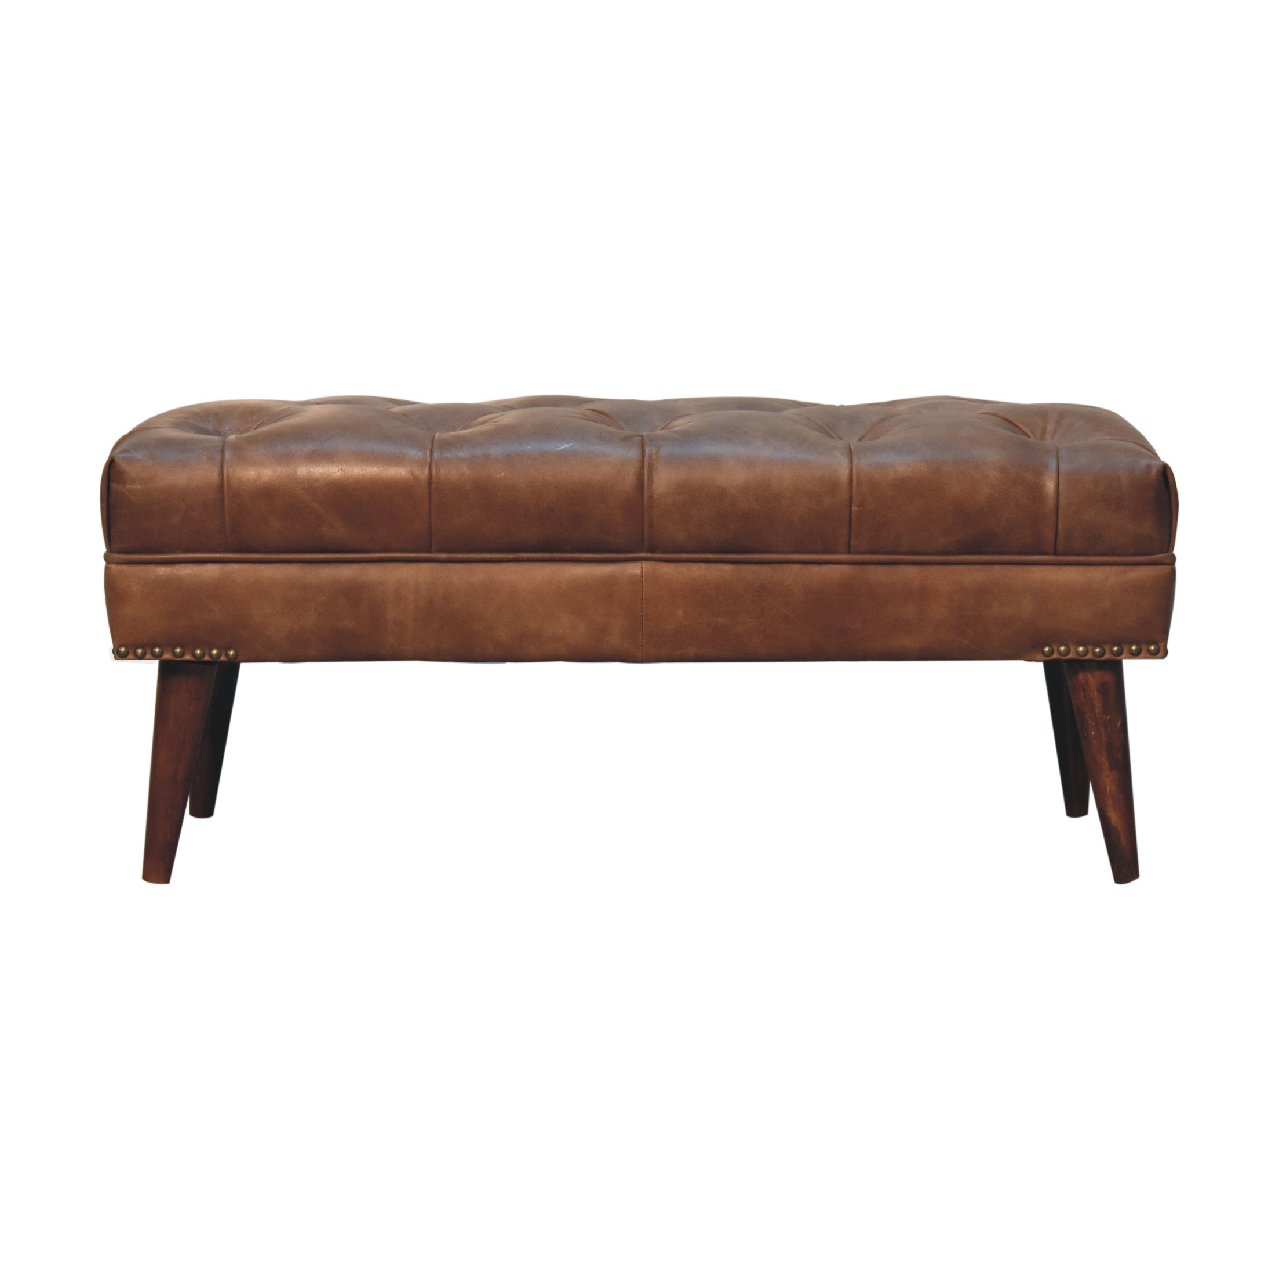 View Harbour Brown Leather Bench information